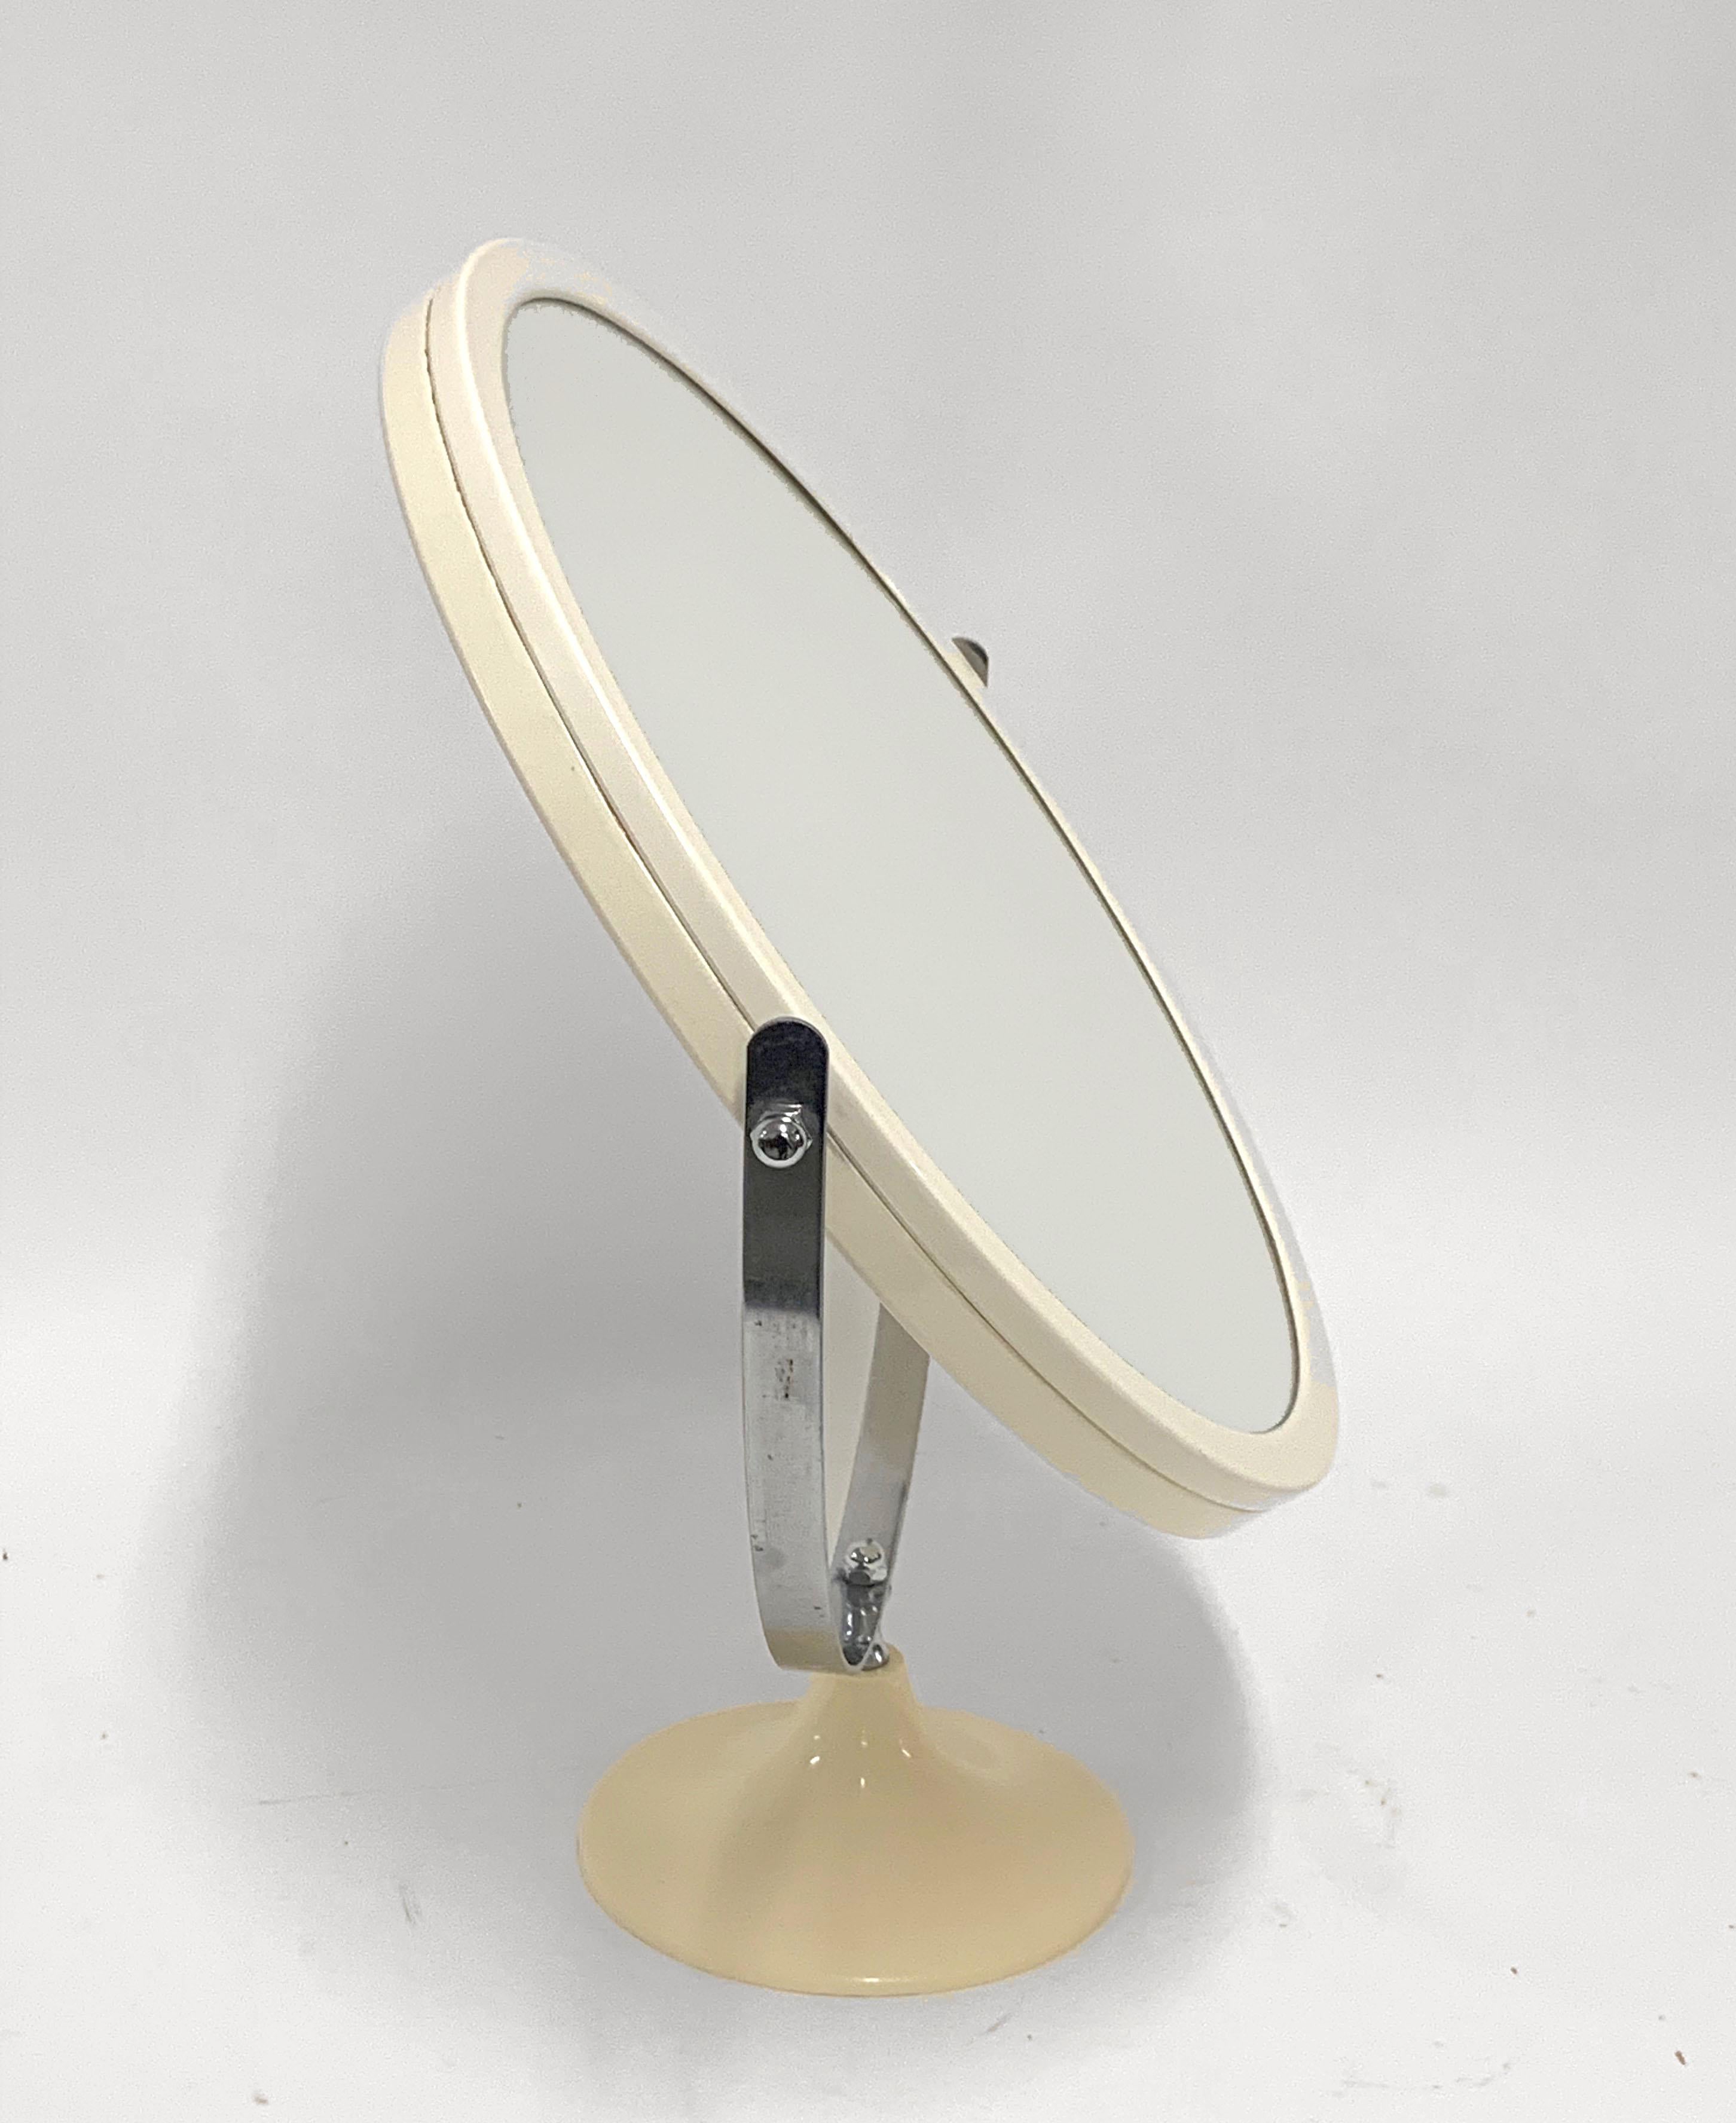 Midcentury Metal and White Plastic Round Italian Table Mirror, Italy, 1980s For Sale 1